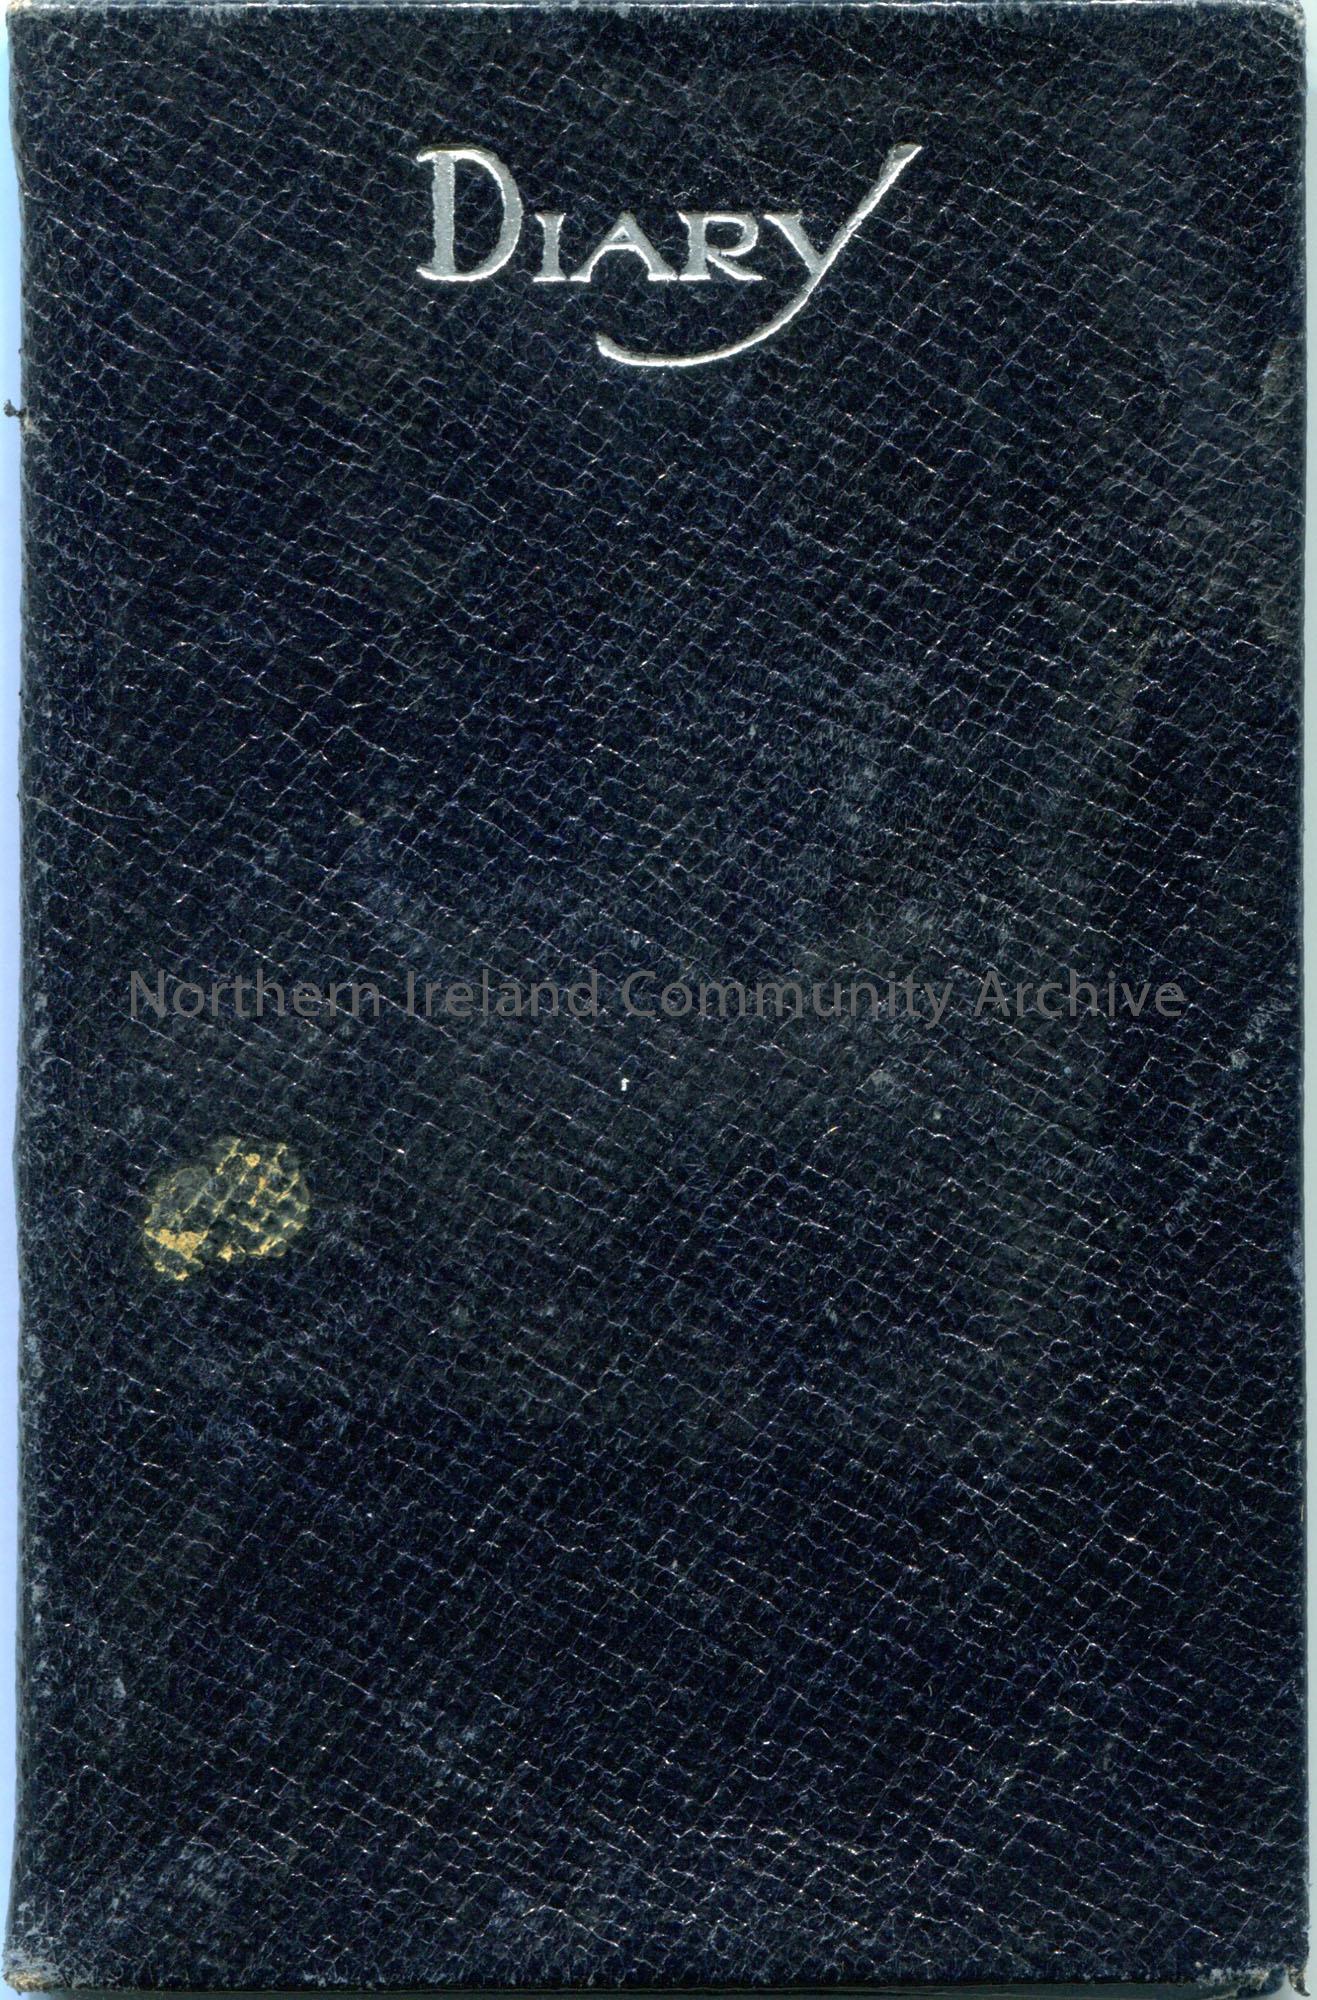 ‘Campbell’s Lisoma’ pocket diary. Black cover. Dated 1945. Belonged to Sam Henry. Sporadic entries throughout.